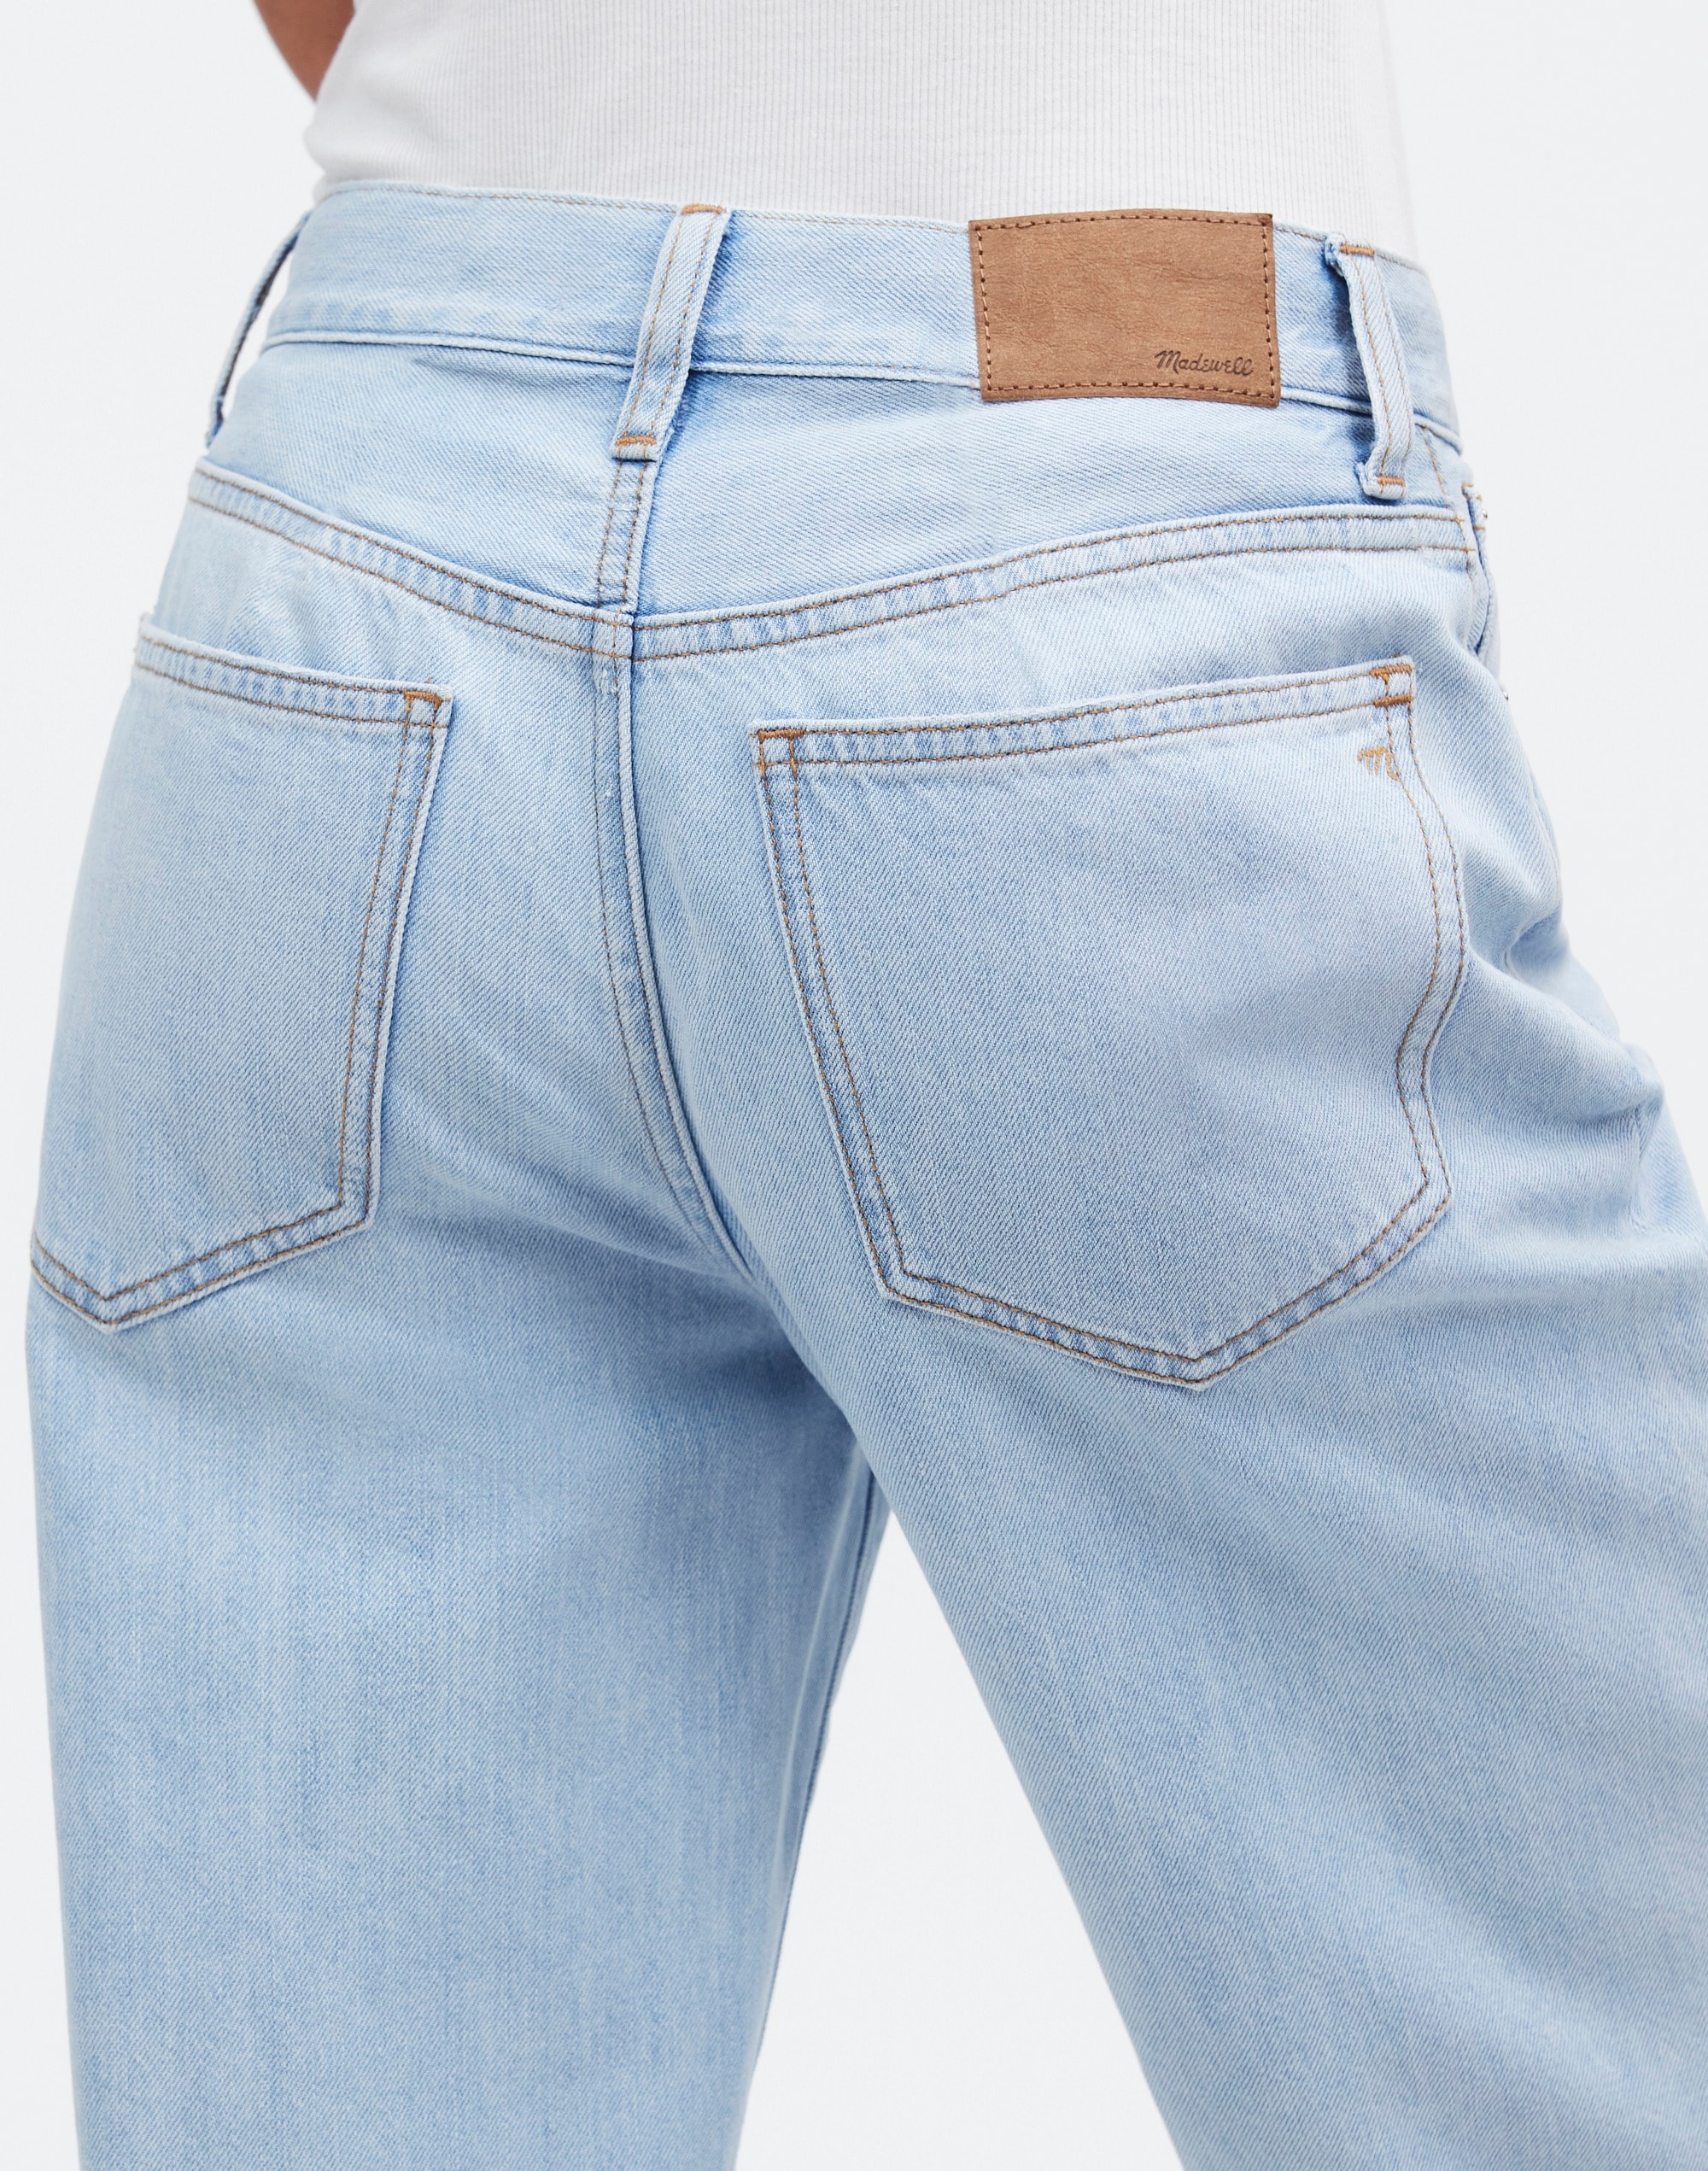 Low-Slung Straight Jeans Fitzgerald Wash: Ripped Edition